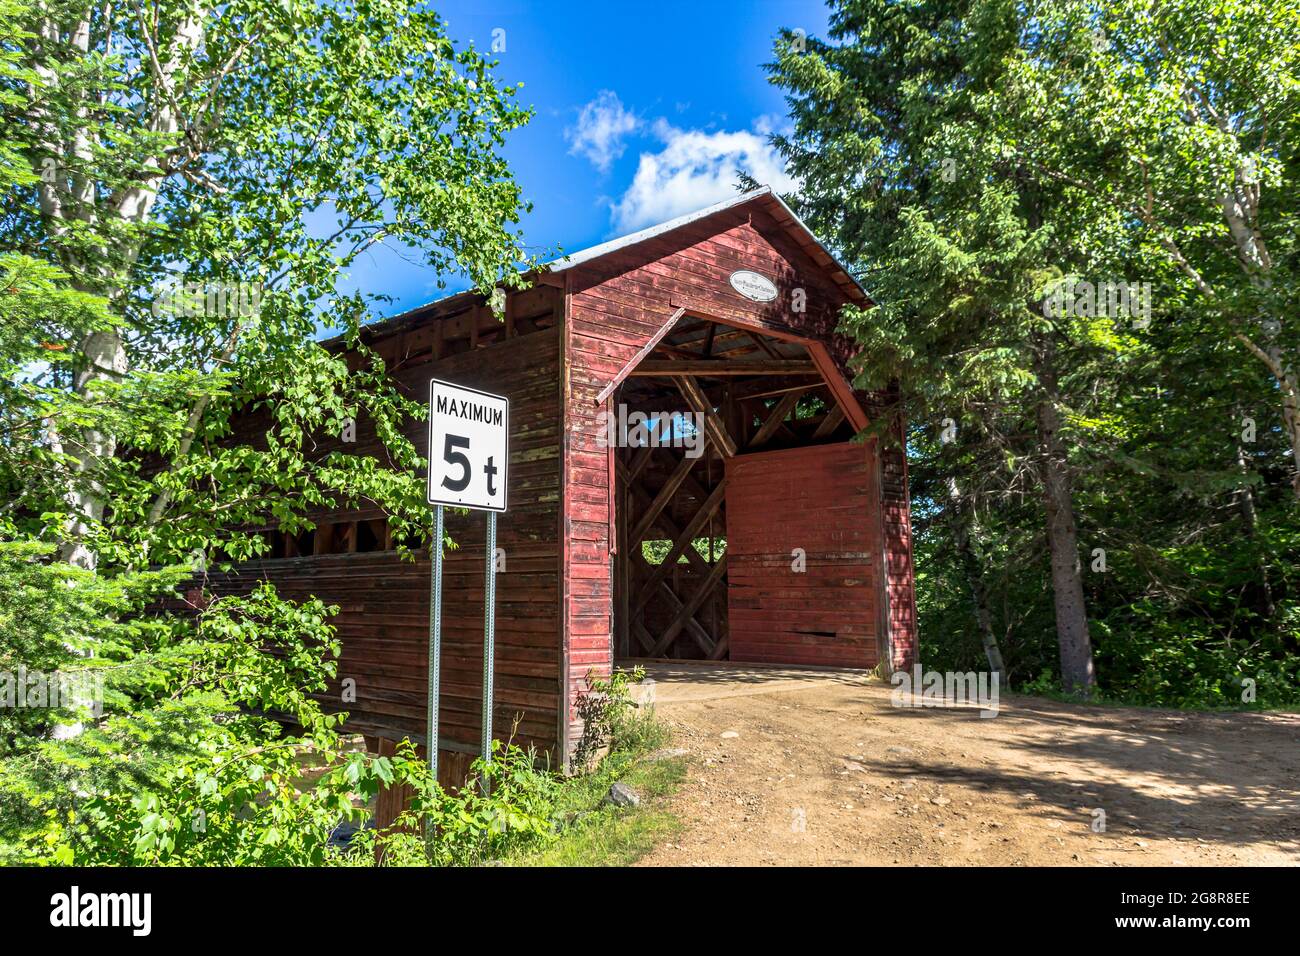 St-Placide-de-Charlevoix covered bridge. Municipality of Baie St-Paul (1926) Charlevoix, Quebec, Canada. Stock Photo